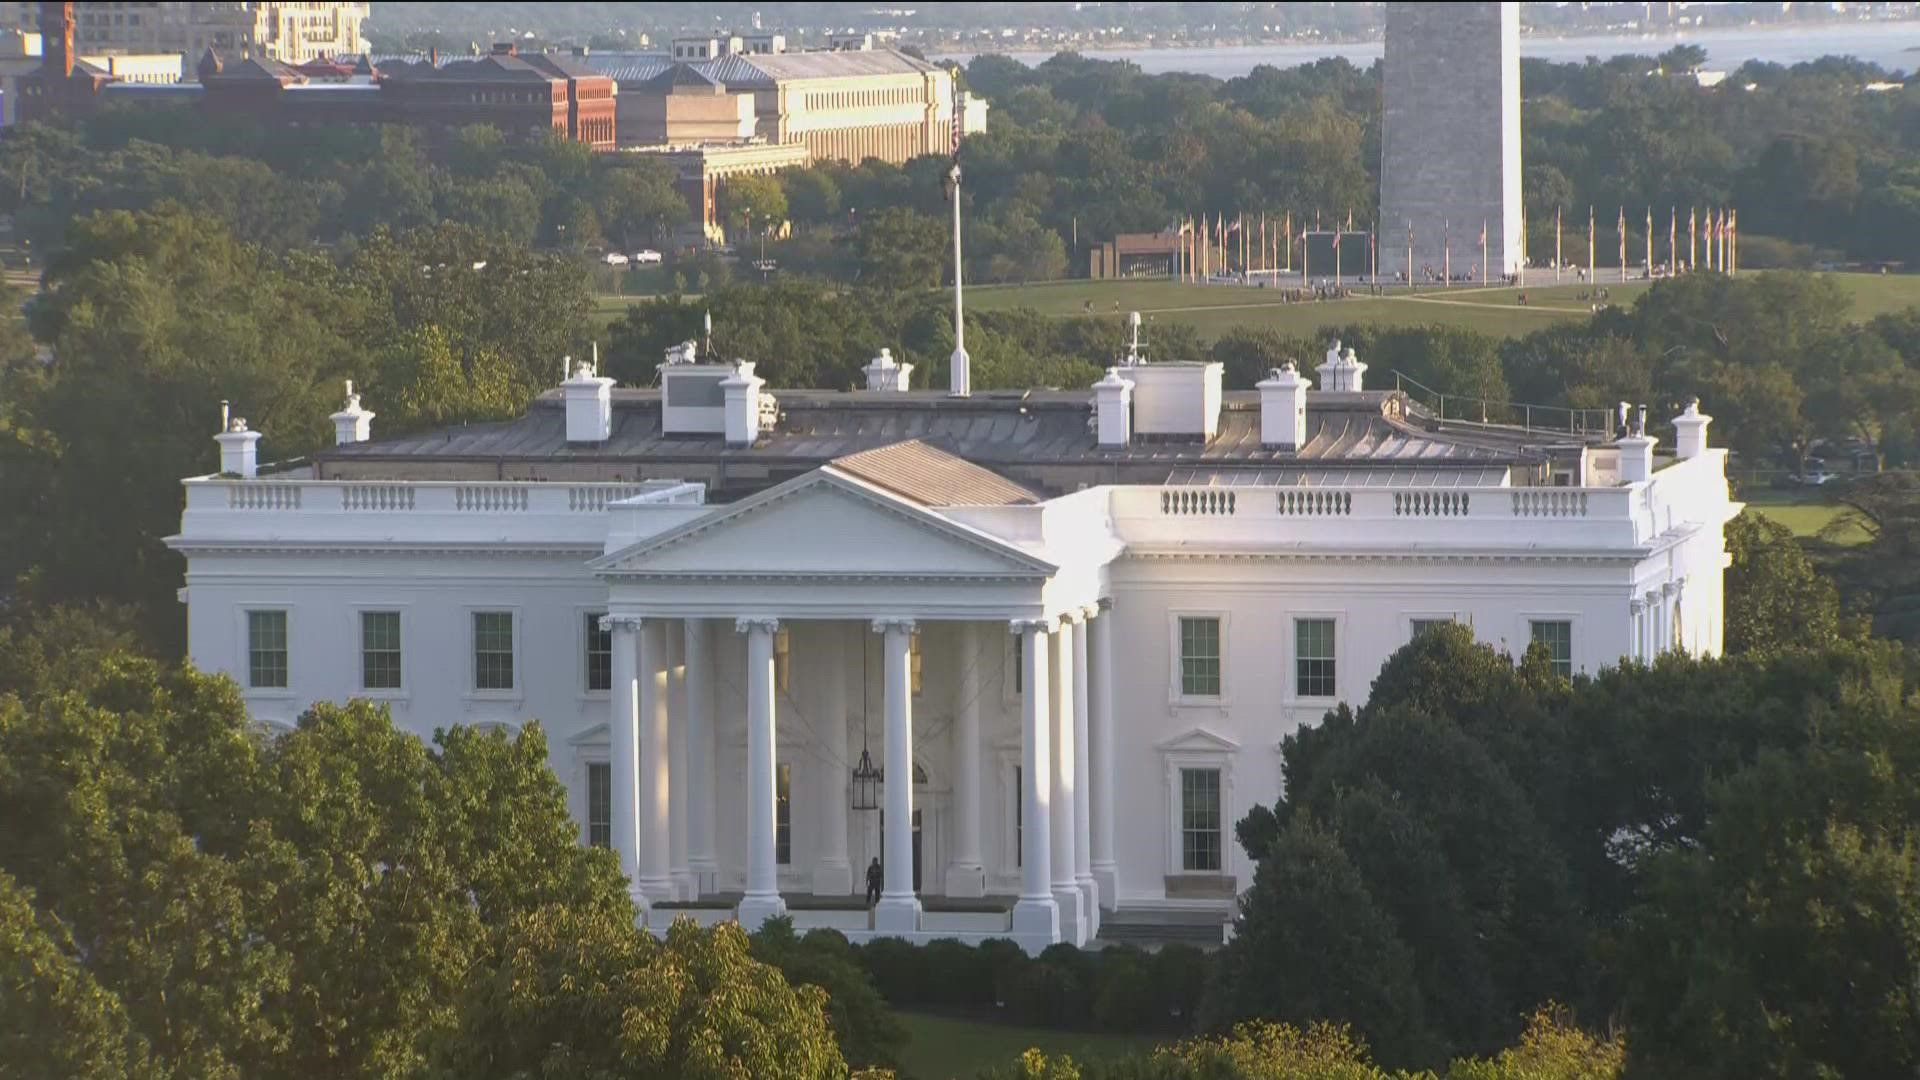 11Alive has all the coverage from Washington D.C. on Monday.